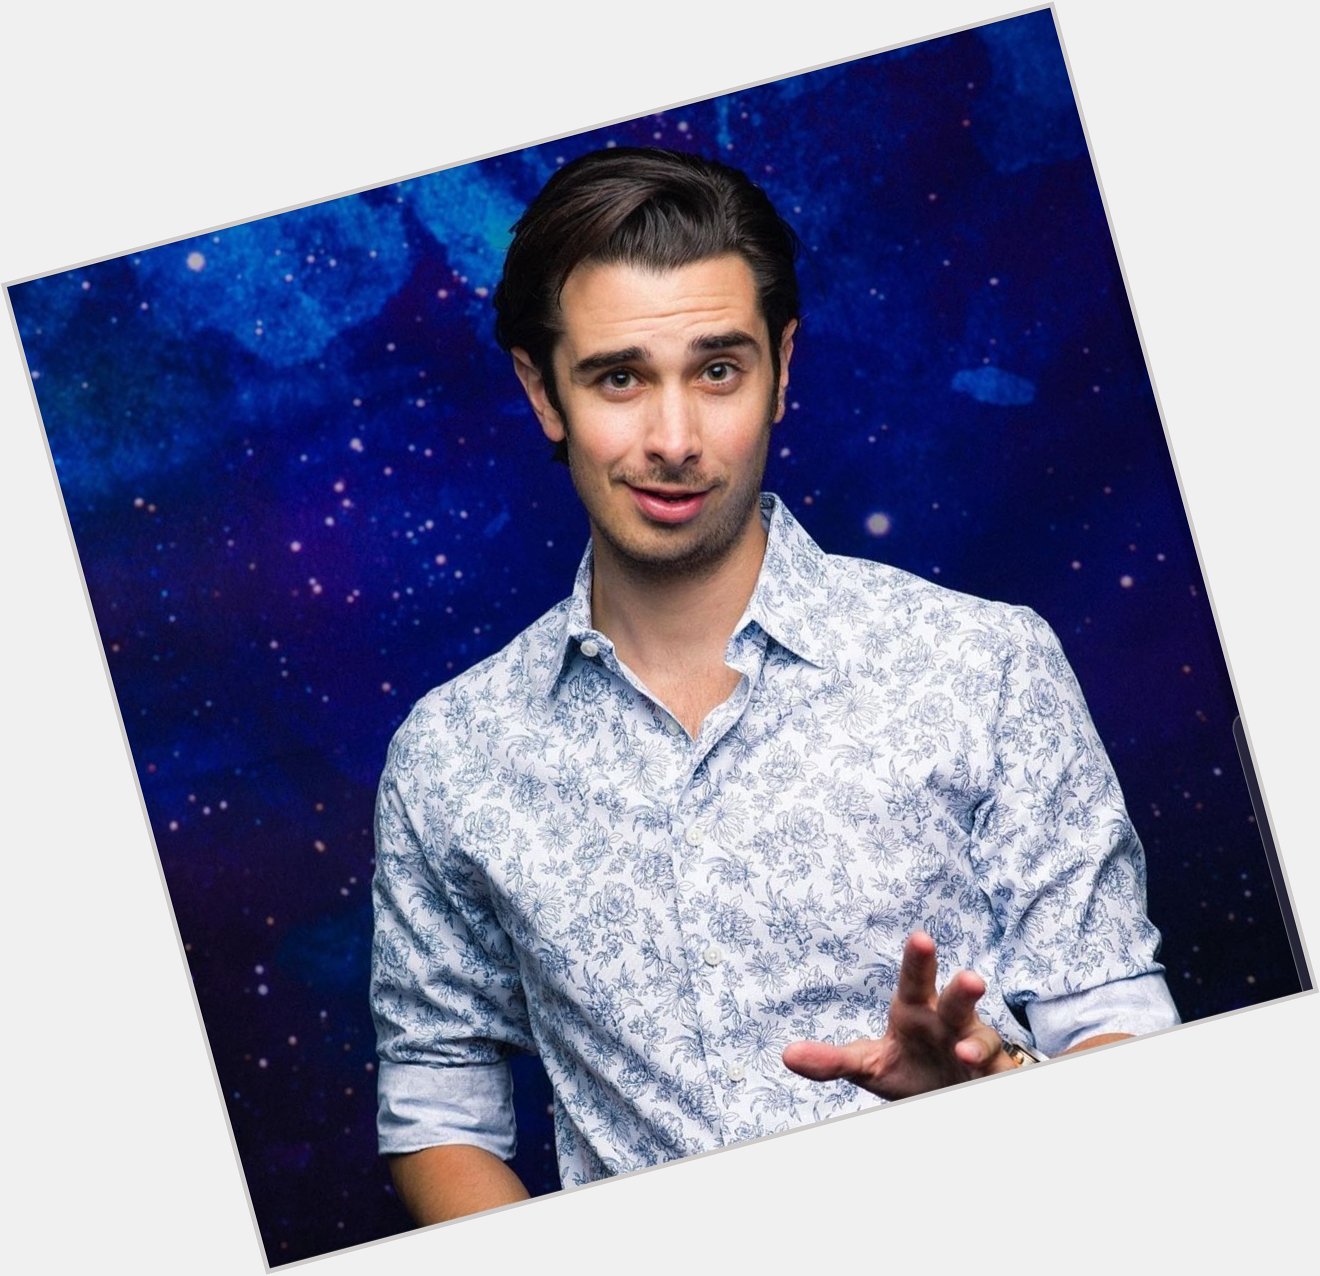 Happy Birthday to Joey Richter and Joey Richter only 